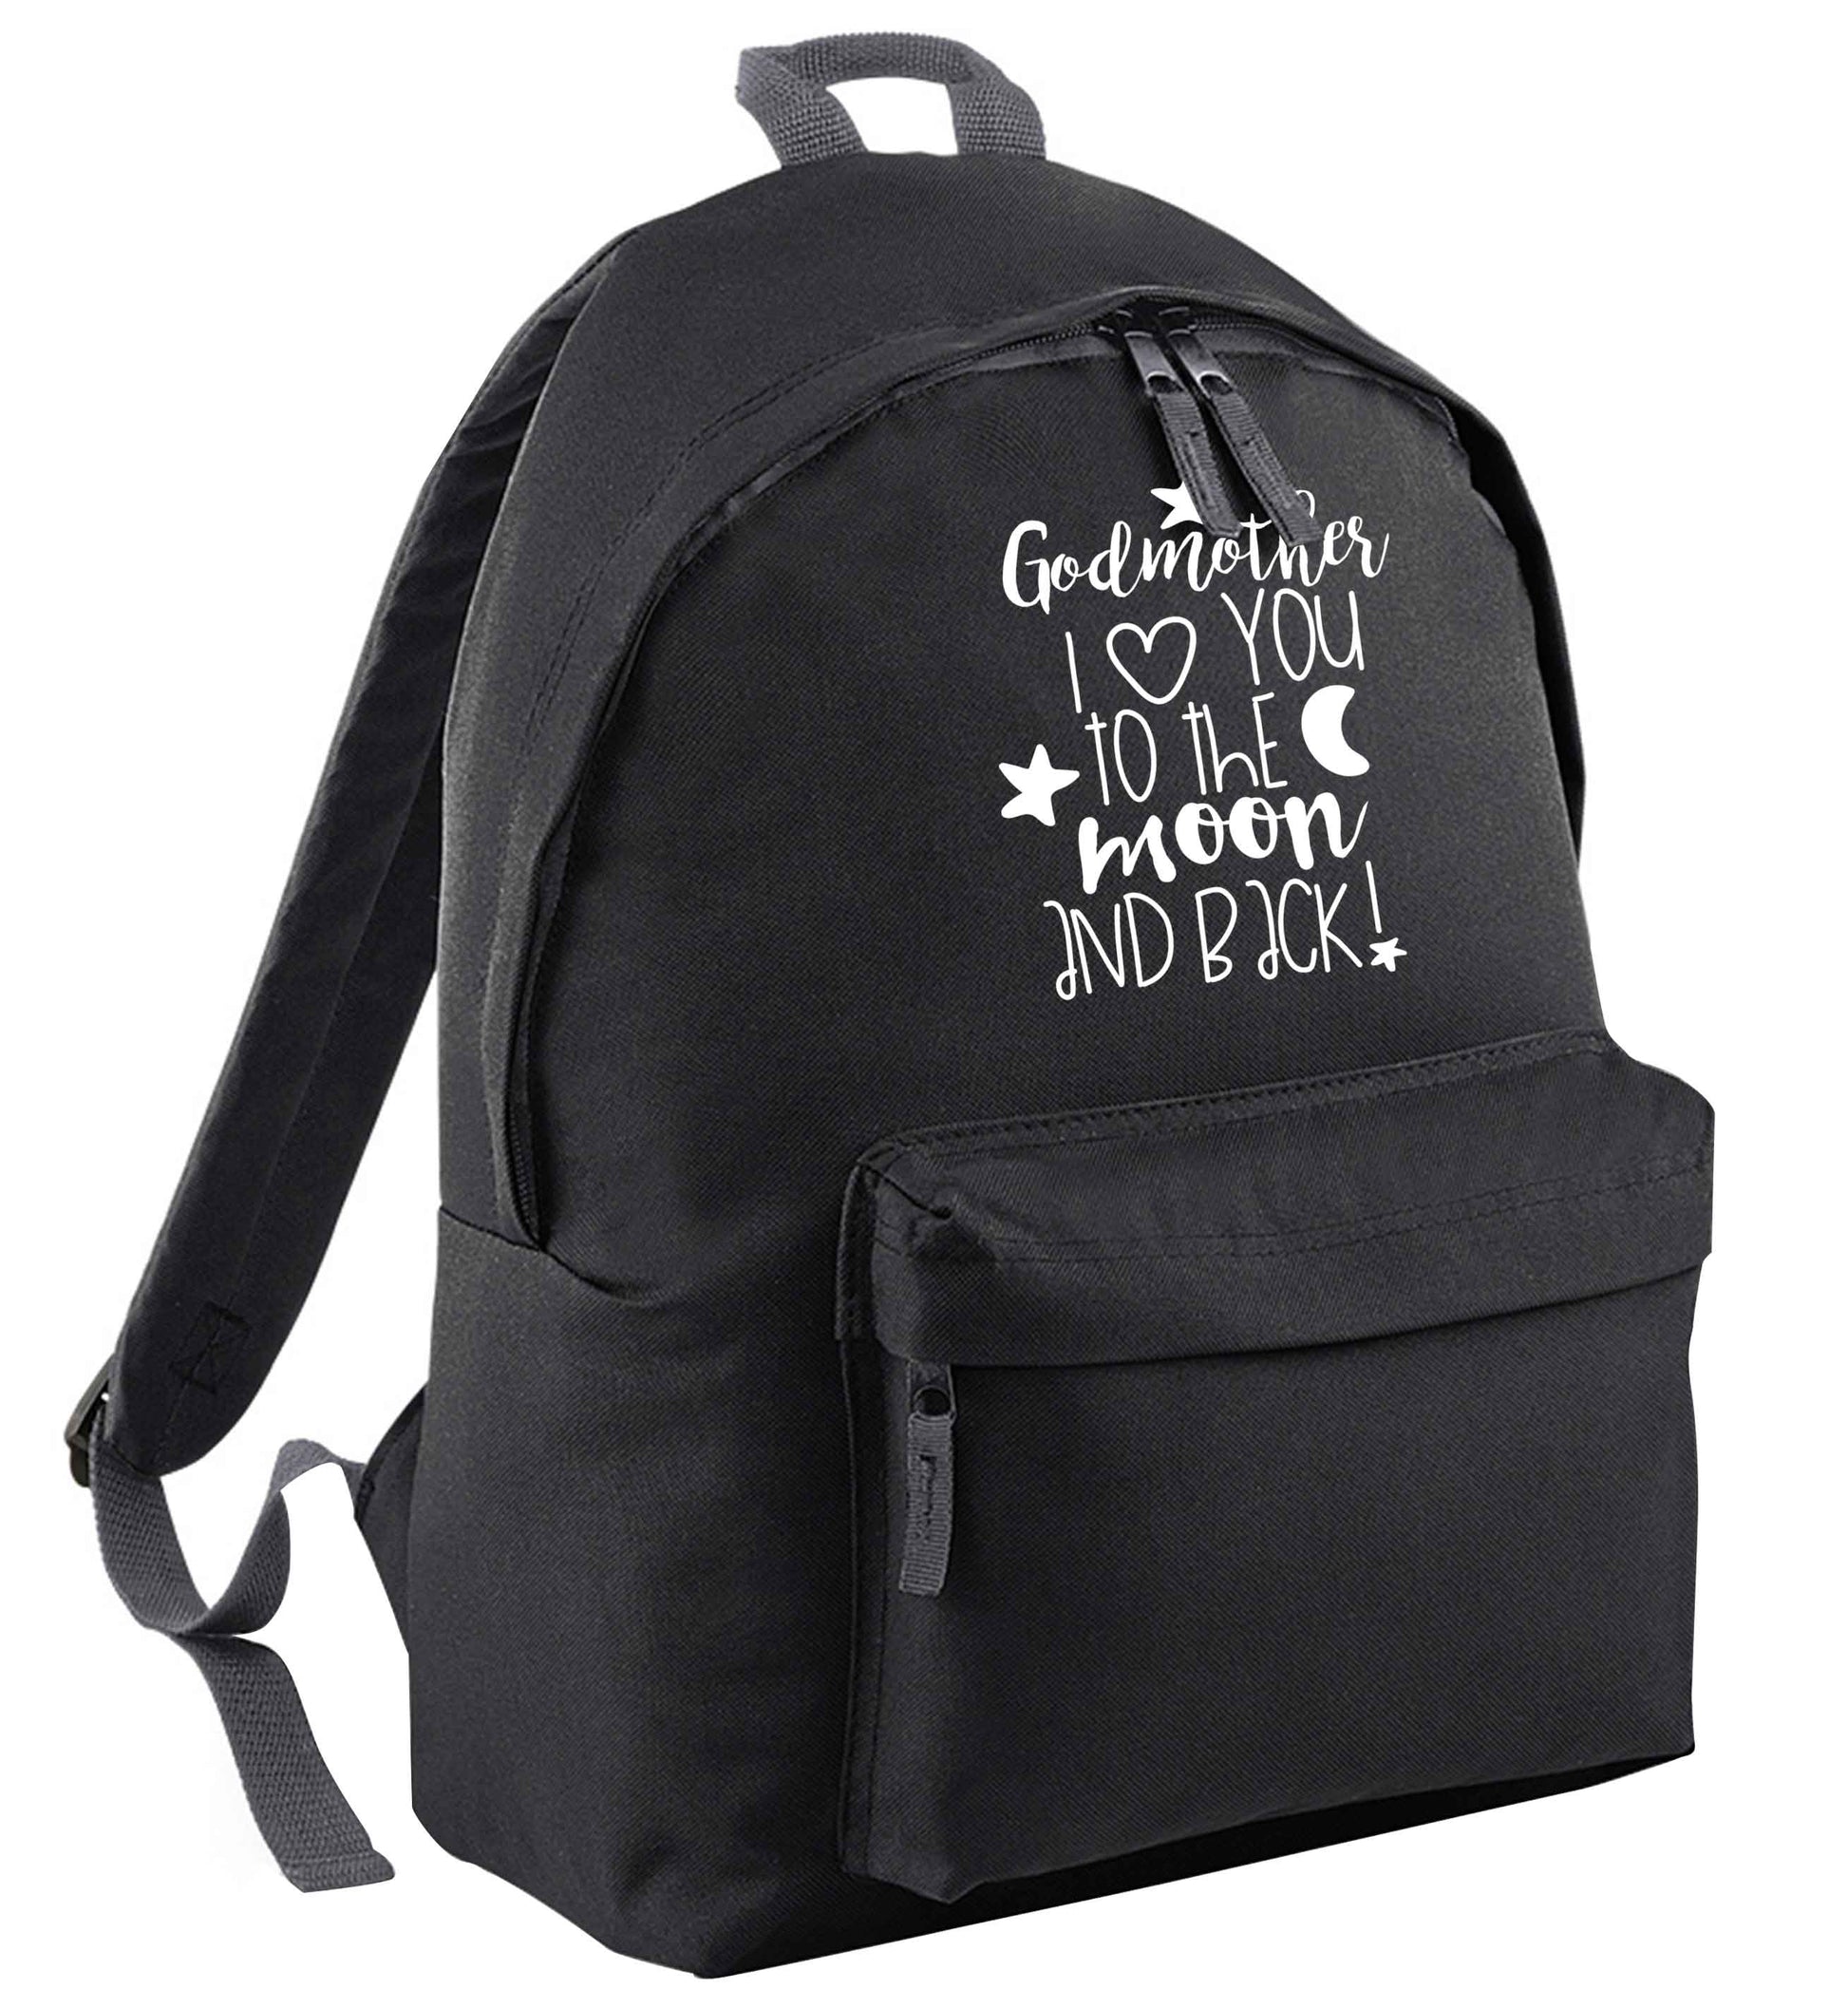 Godmother I love you to the moon and back black adults backpack